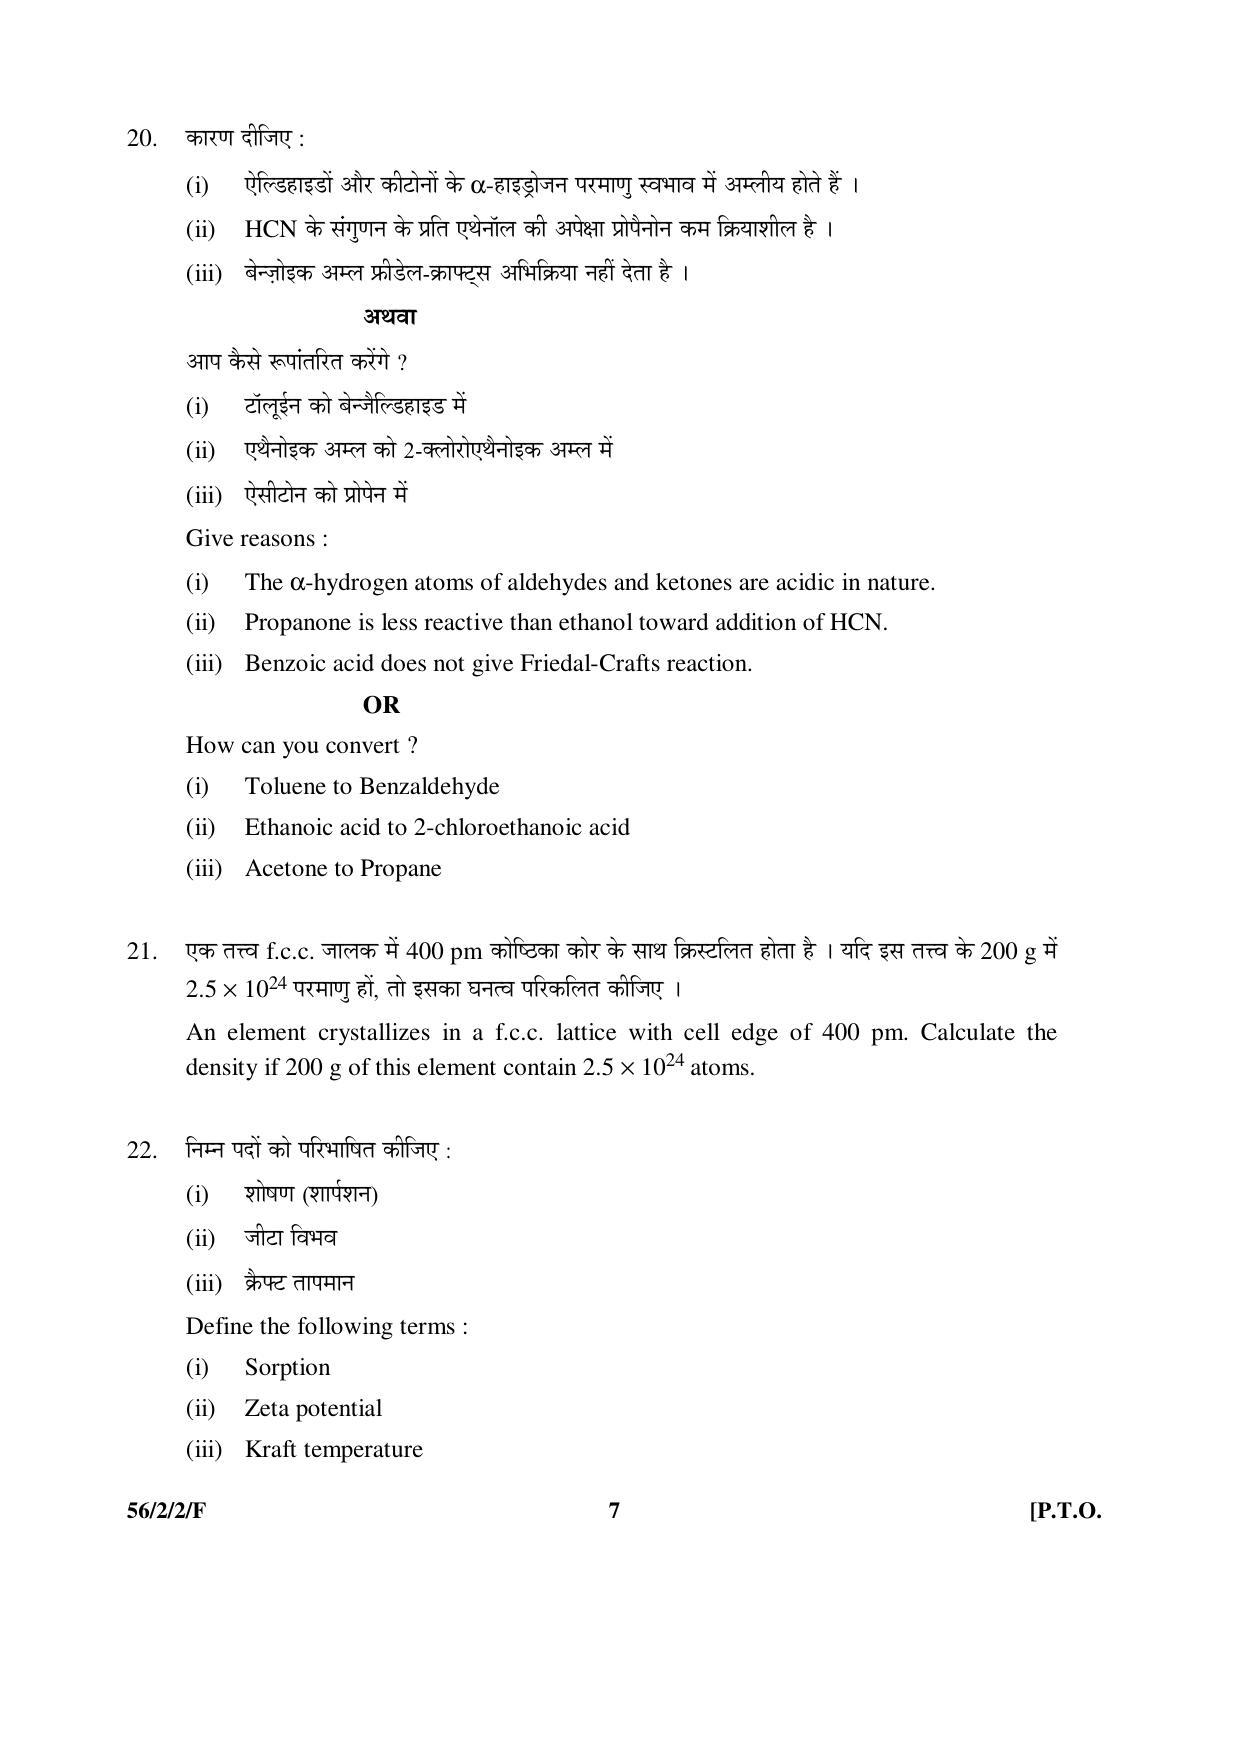 CBSE Class 12 56-2-2-F _Chemistry_ 2016 Question Paper - Page 7